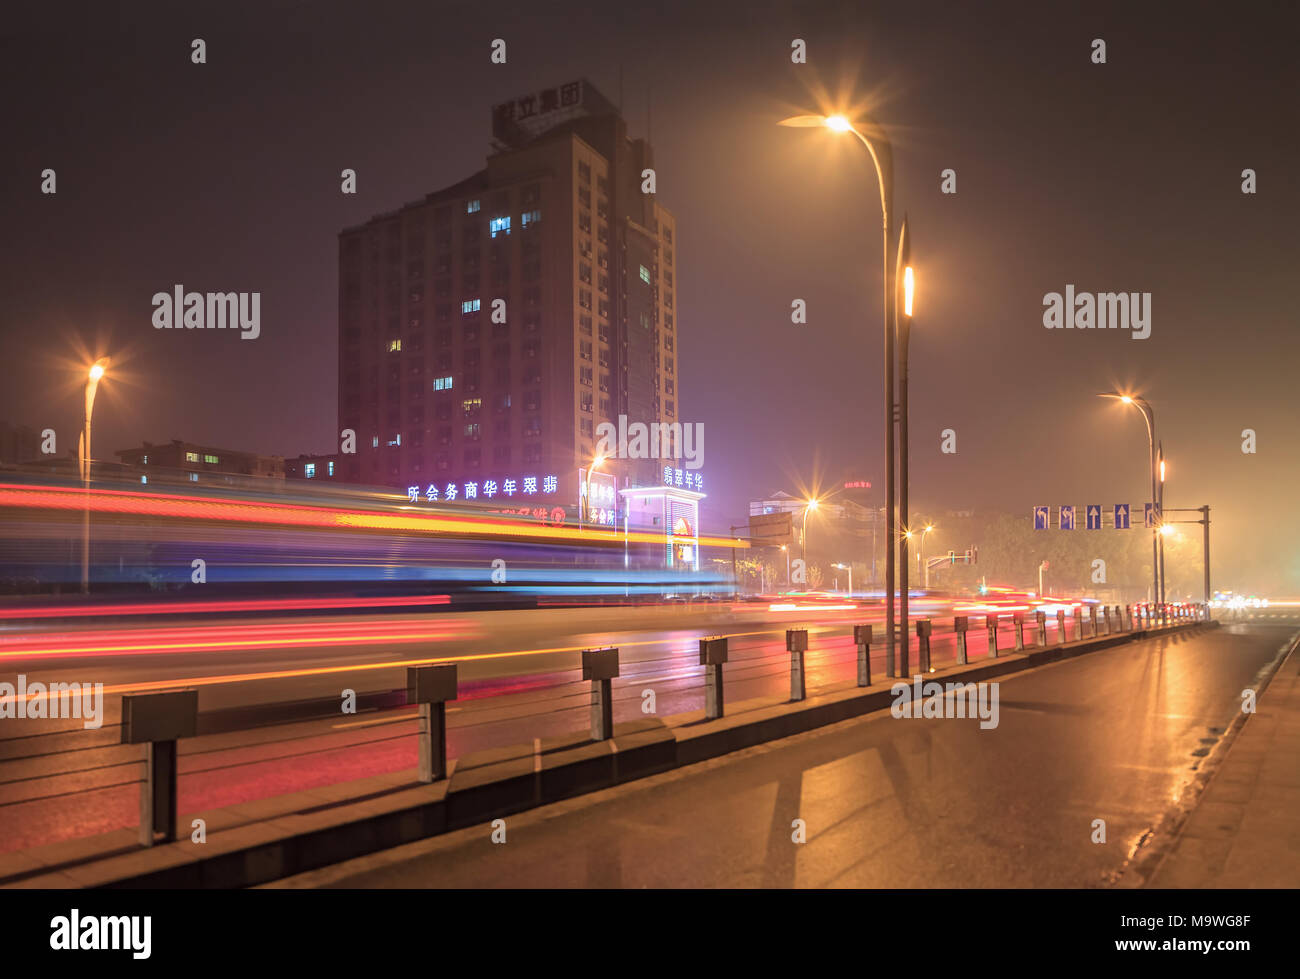 NANJING-MAY 24, 2014. Night scene with apartment building and traffic in motion blur. Nanjing is located in east of China in Yangtze River delta. Stock Photo